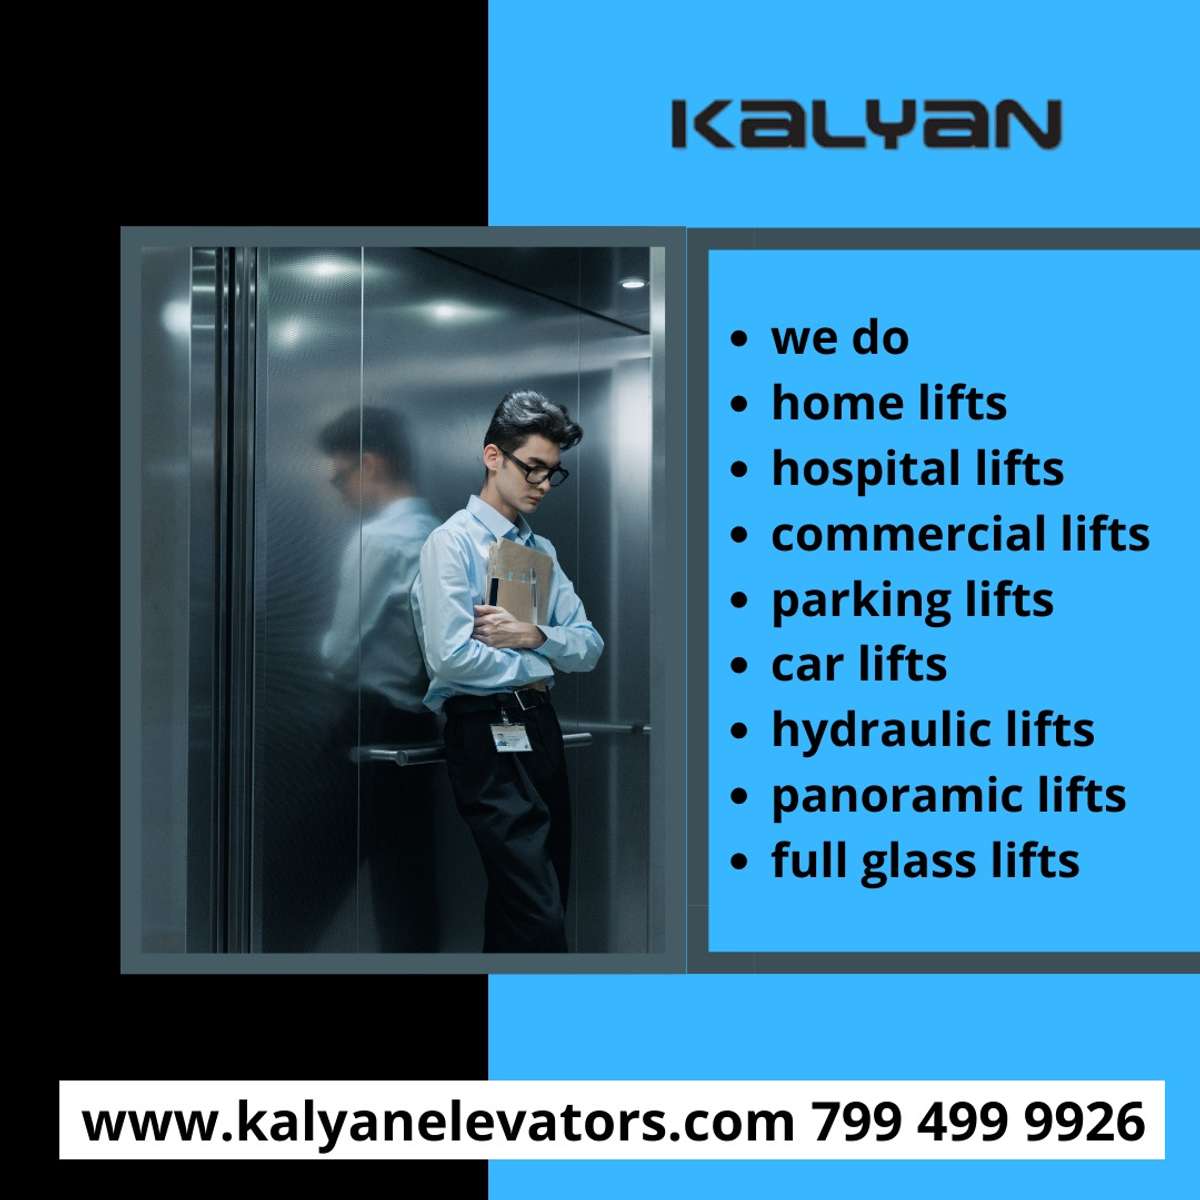 Kalyan Elevators offers the long-awaited solution to vertical mobility within homes/commercial at affordable prices and easy-to-use features. Our customized and aesthetically designed home/building lifts are easily installable in pre existing homes / commercial buildings as well as houses/buildings under construction, and help you relieve the headache of climbing. More details:- 